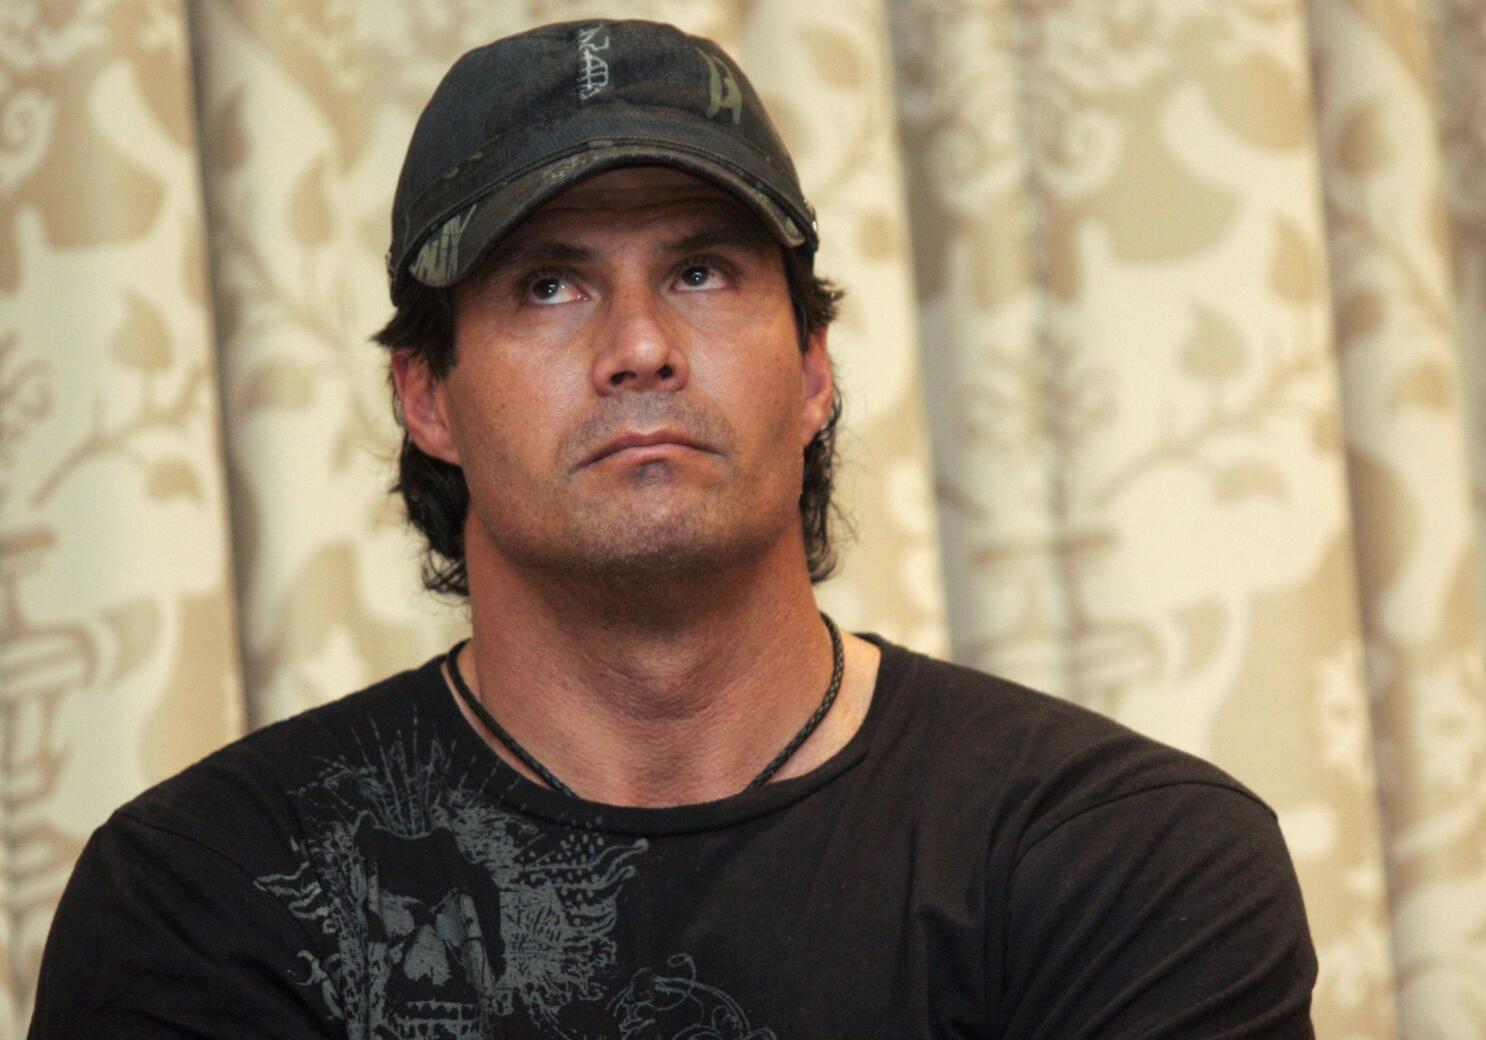 Report: Jose Canseco Accidentally Shoots Own Hand While Cleaning Gun 